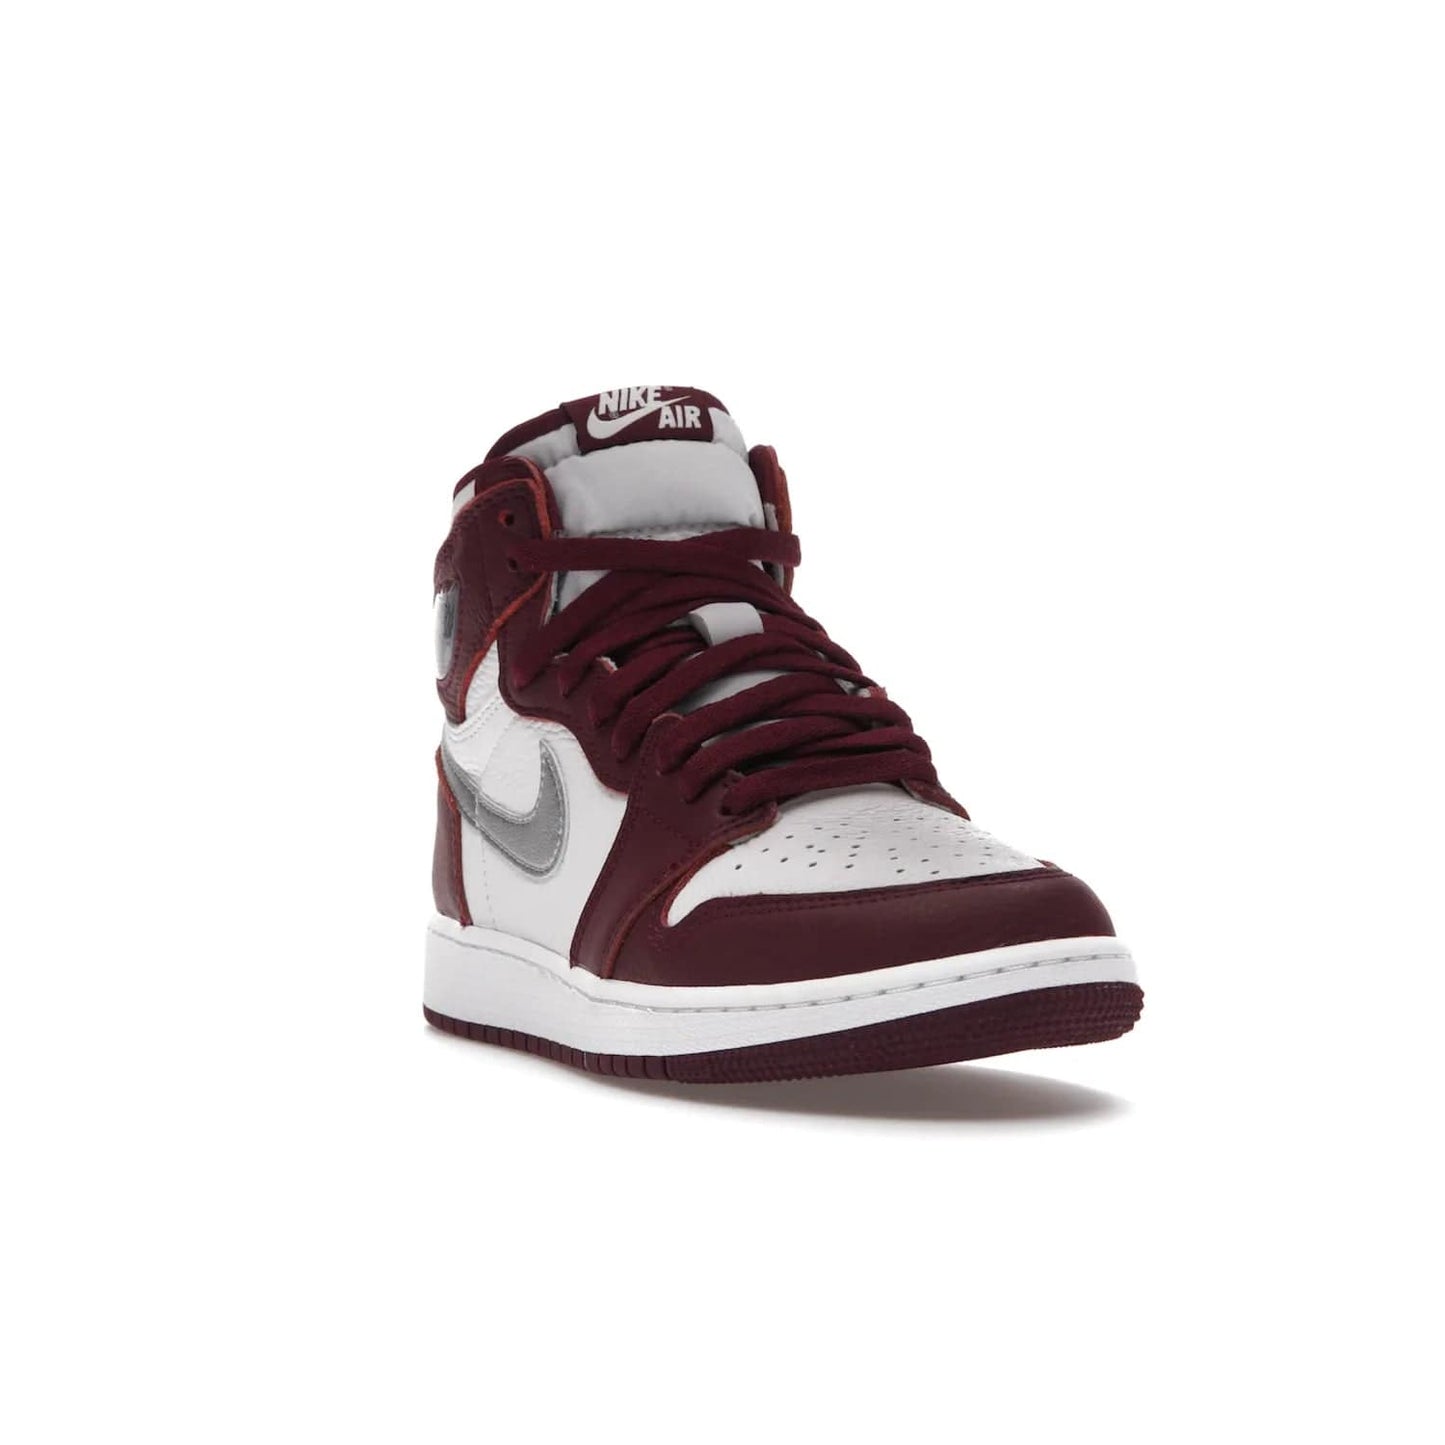 Jordan 1 Retro High OG Bordeaux (GS) - Image 7 - Only at www.BallersClubKickz.com - #
Introducing the Air Jordan 1 Retro High OG Bordeaux GS – a signature colorway part of the Jordan Brand Fall 2021 lineup. White leather upper & Bordeaux overlays, metallic silver swoosh, jeweled Air Jordan Wings logo & more. Step up your style game with this sleek fall season silhouette.